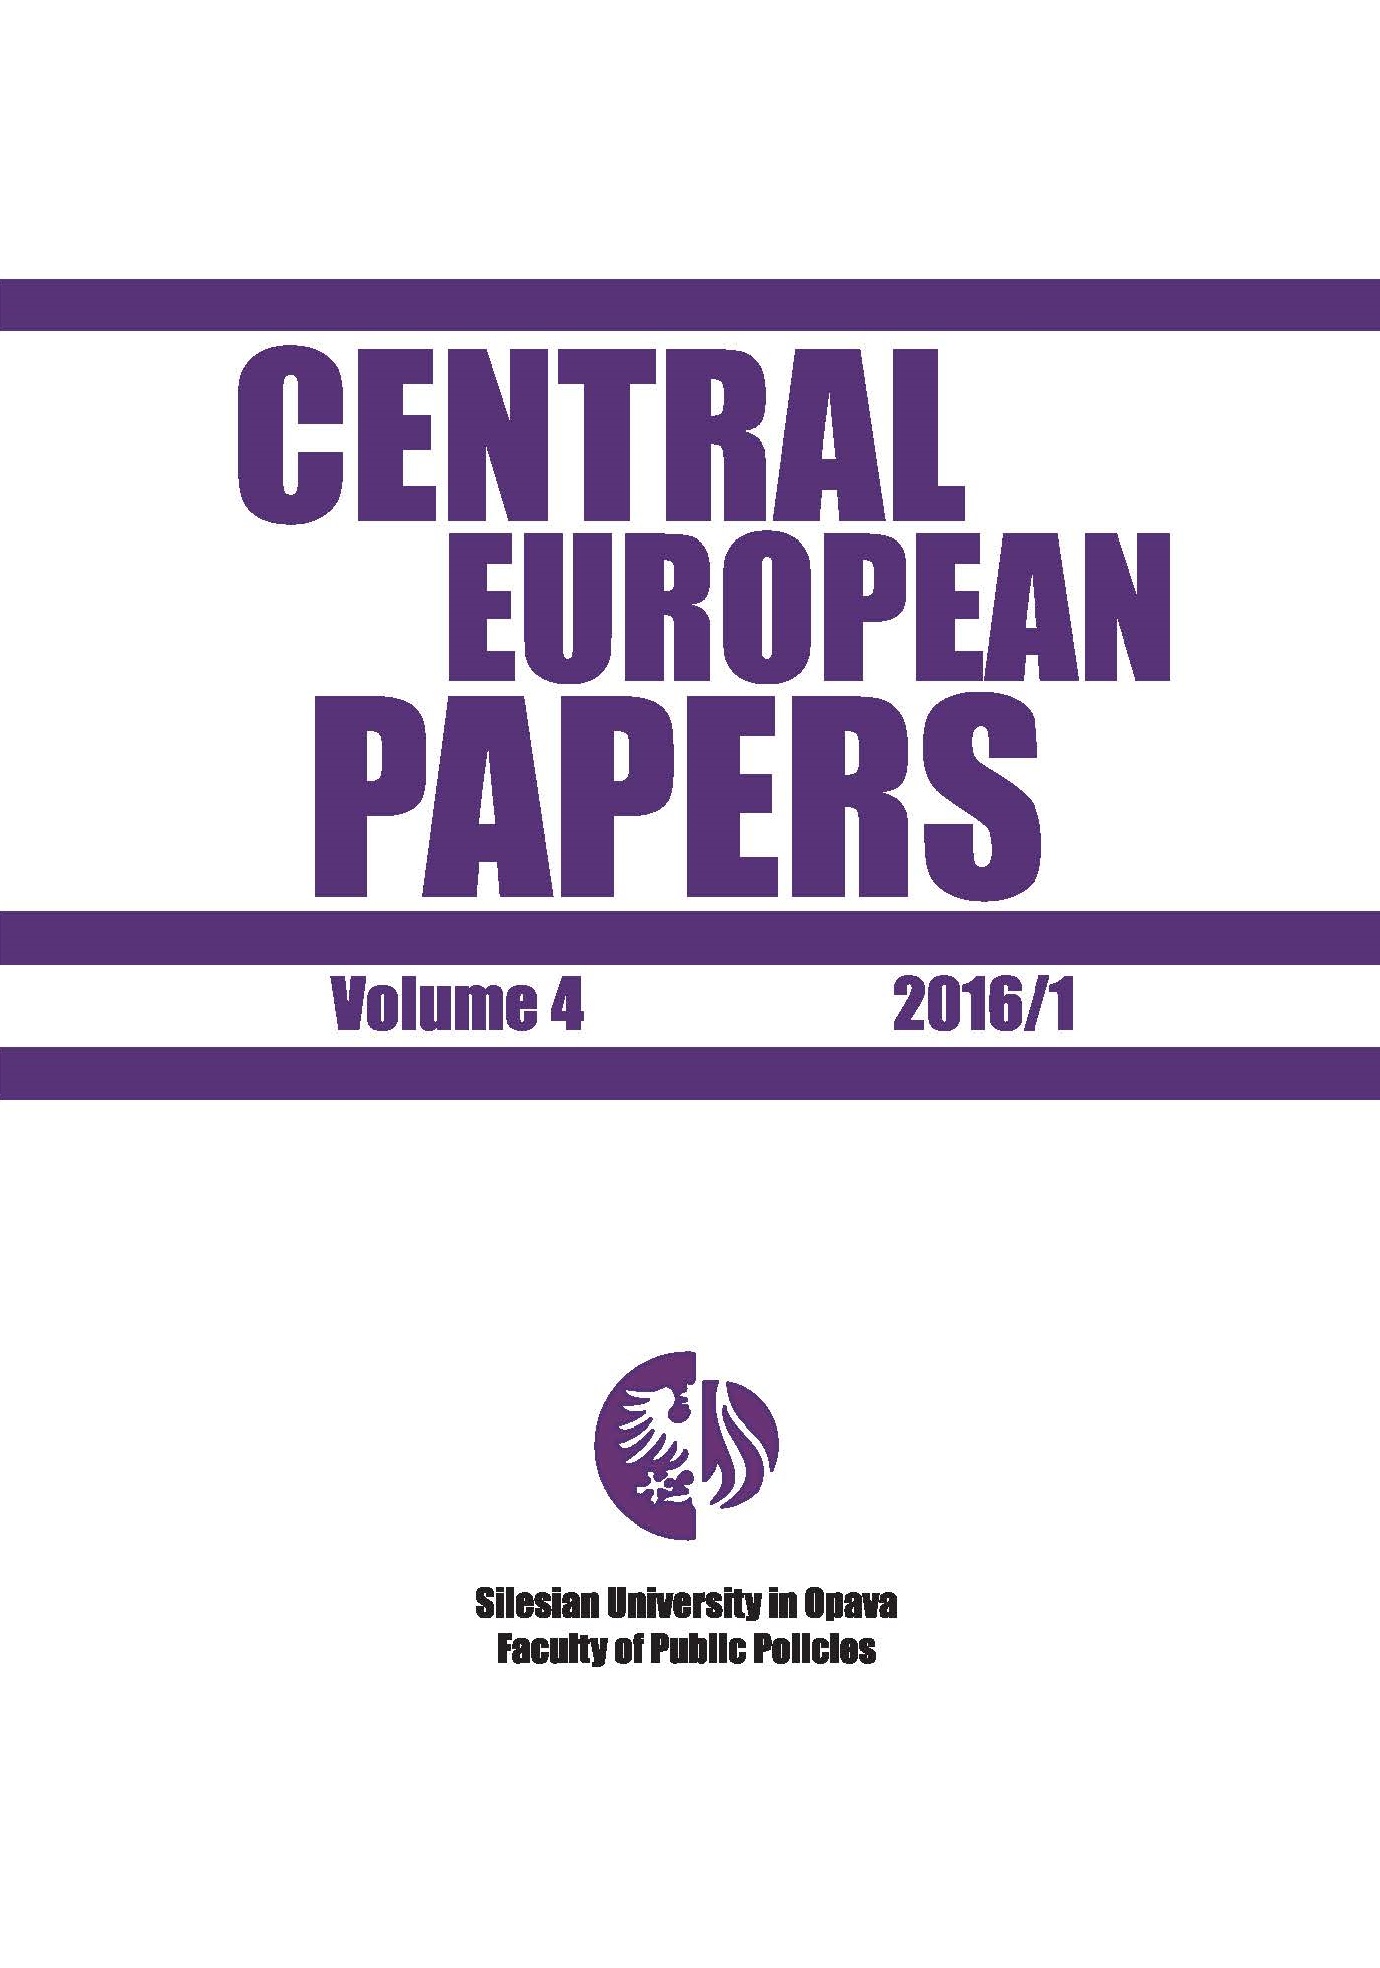 The Past and Future of the European Union Internal Market – Visegrad Group Perspective